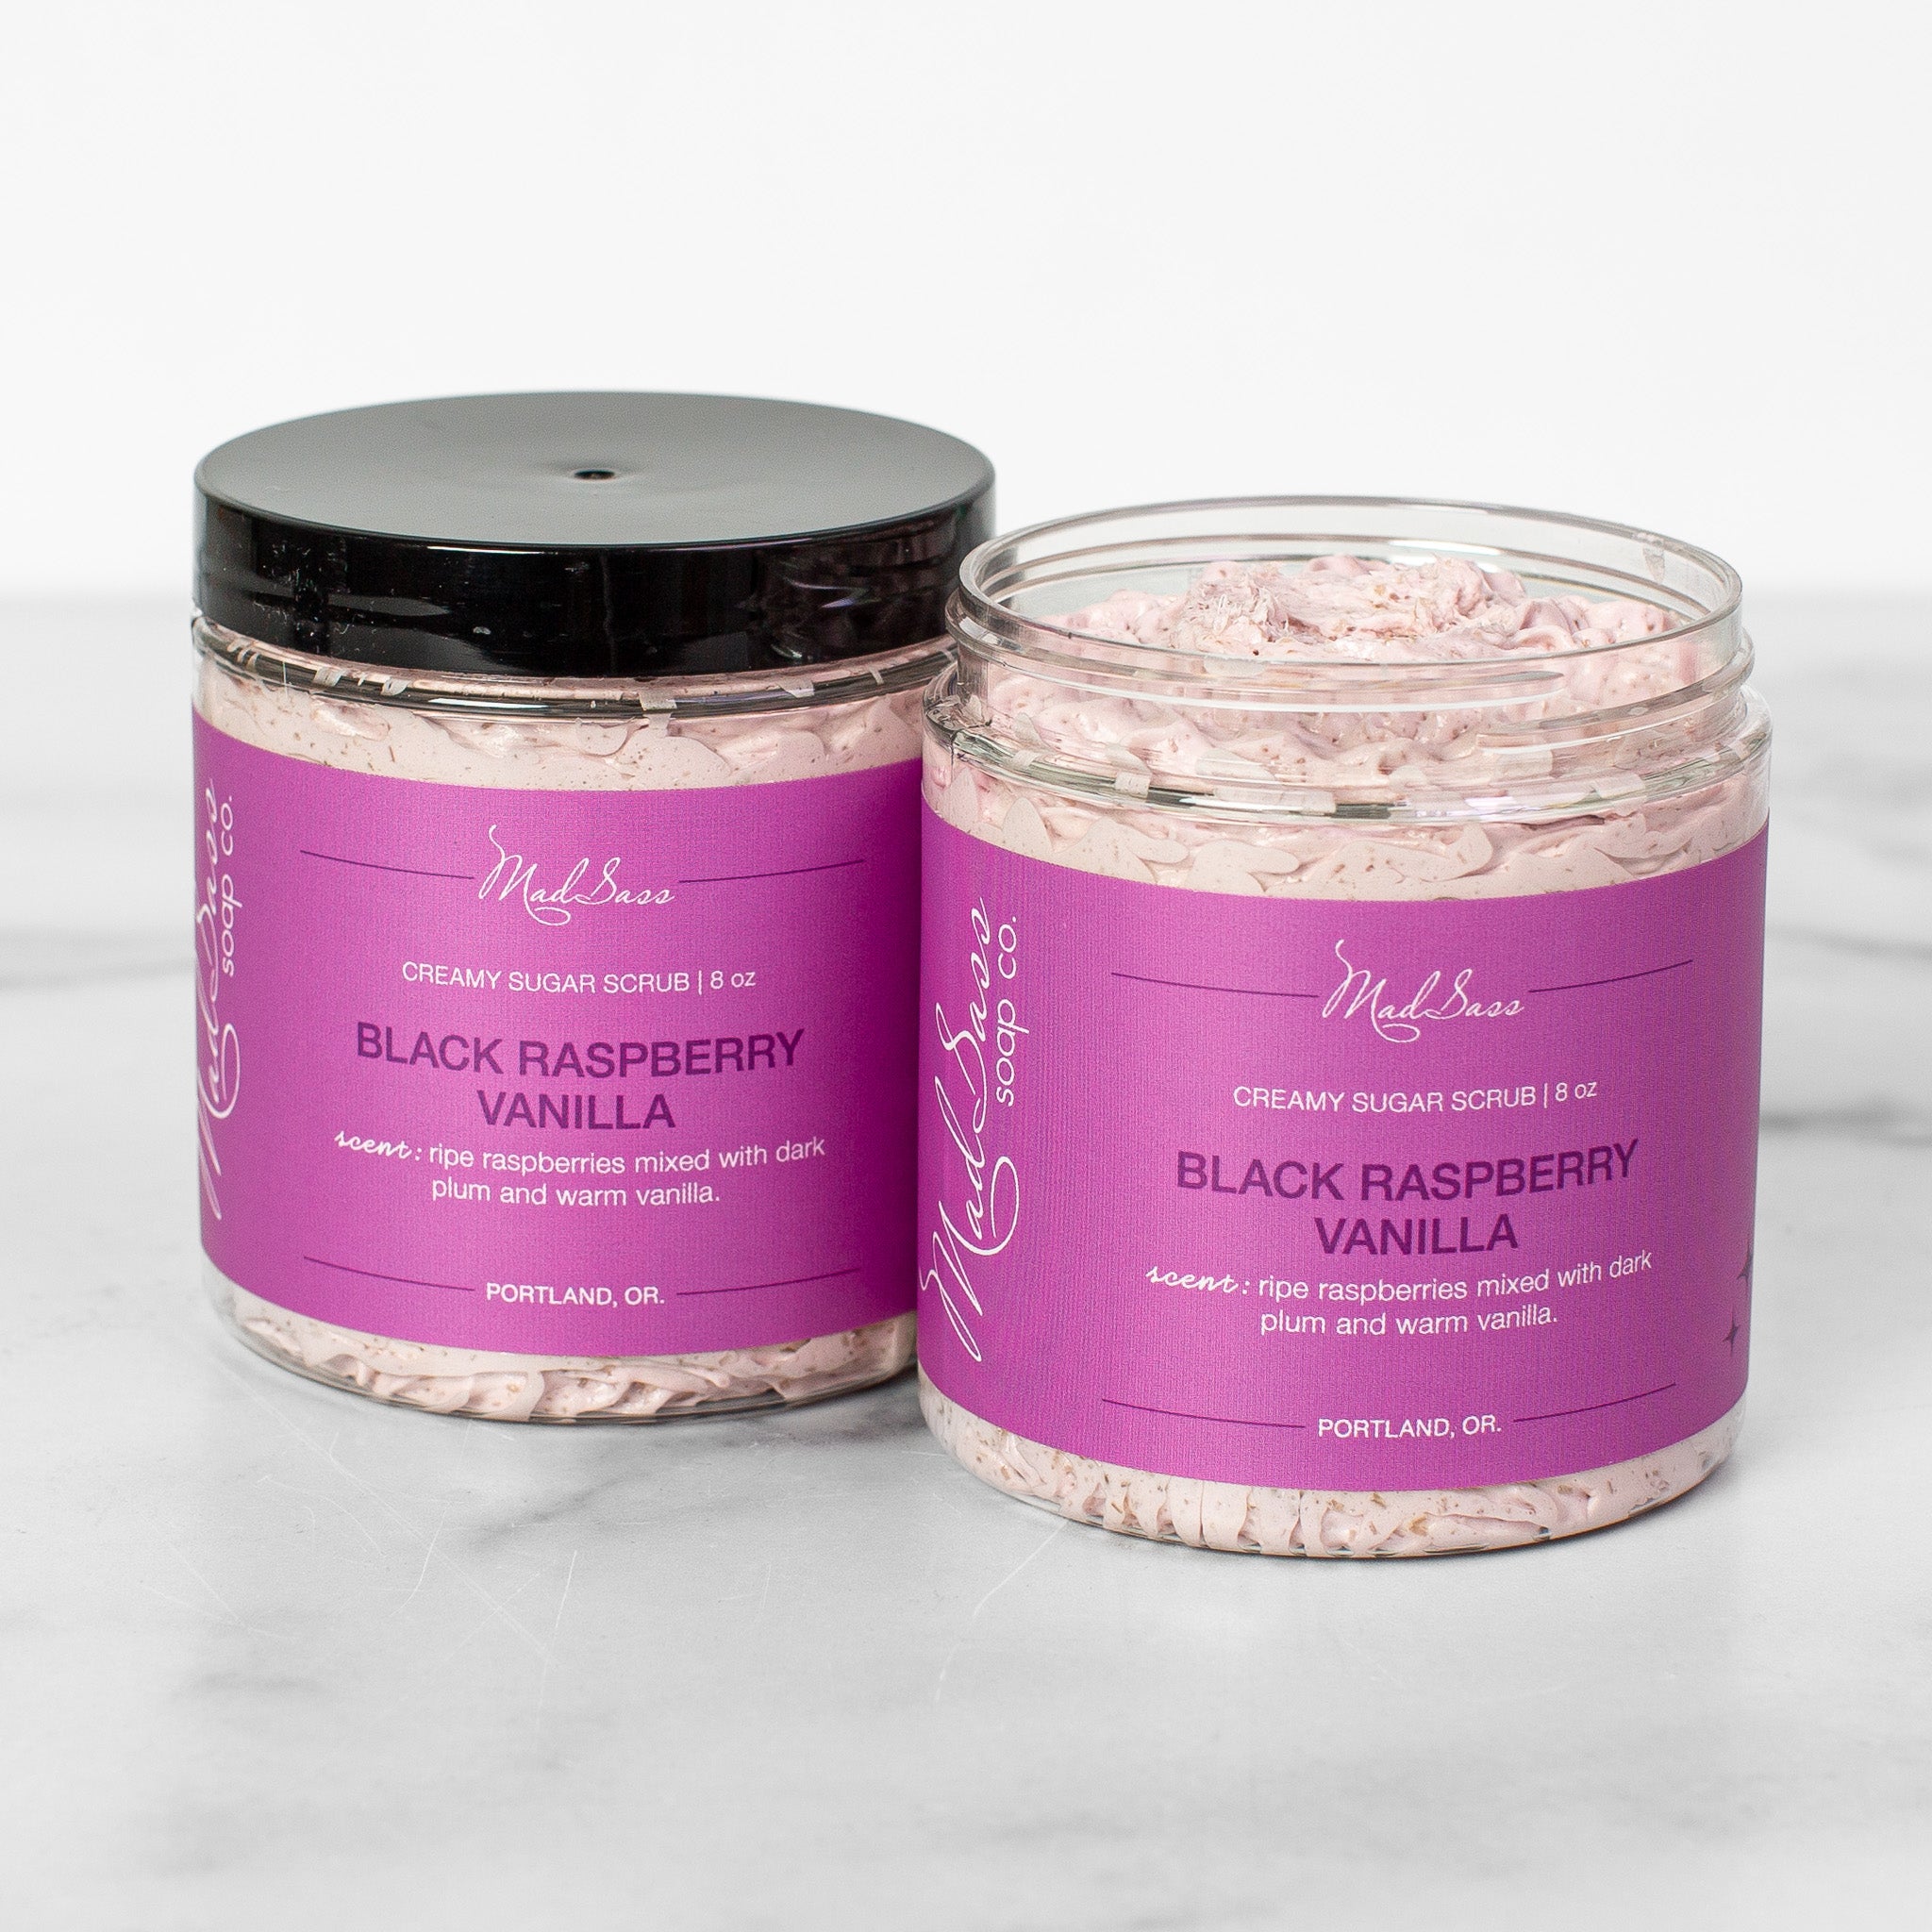 Two containers of Black Raspberry Vanilla Creamy Sugar Scrubs on a white background. Black Raspberry Vanilla is a light purple scrub in a clear tub with a black lid.